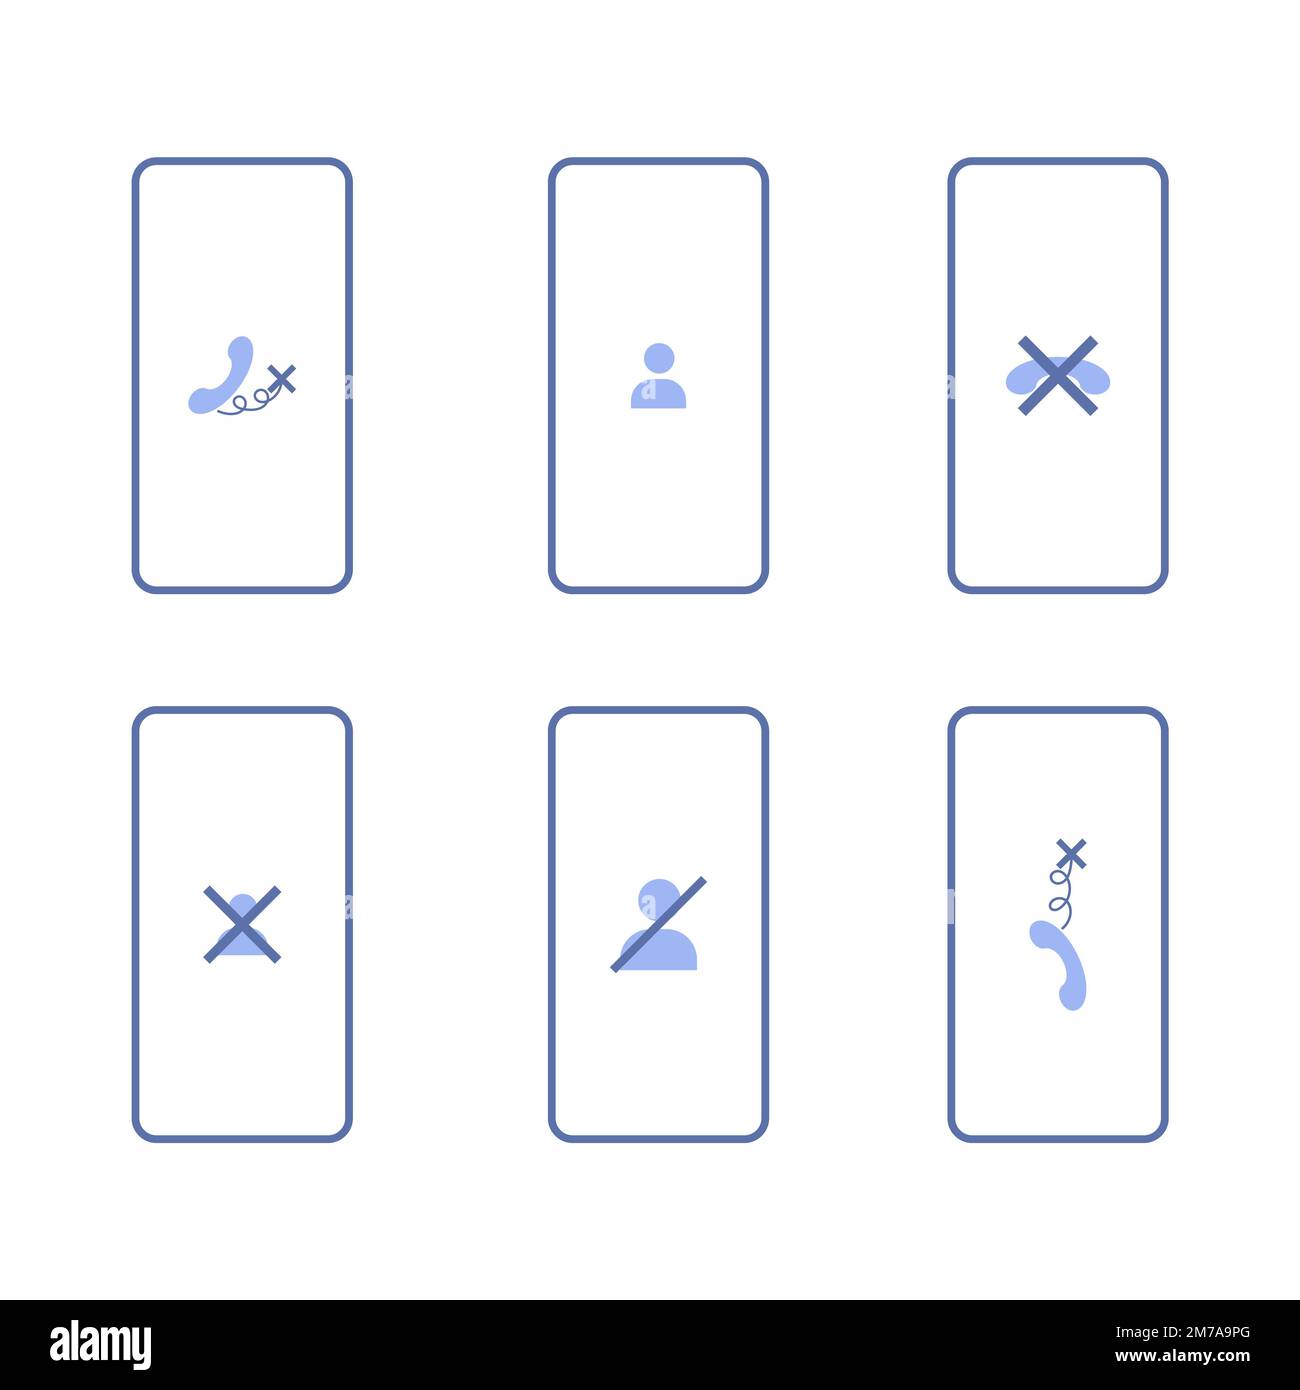 No signal or lost connection. Set of illustrations with different icons on a phone Stock Vector